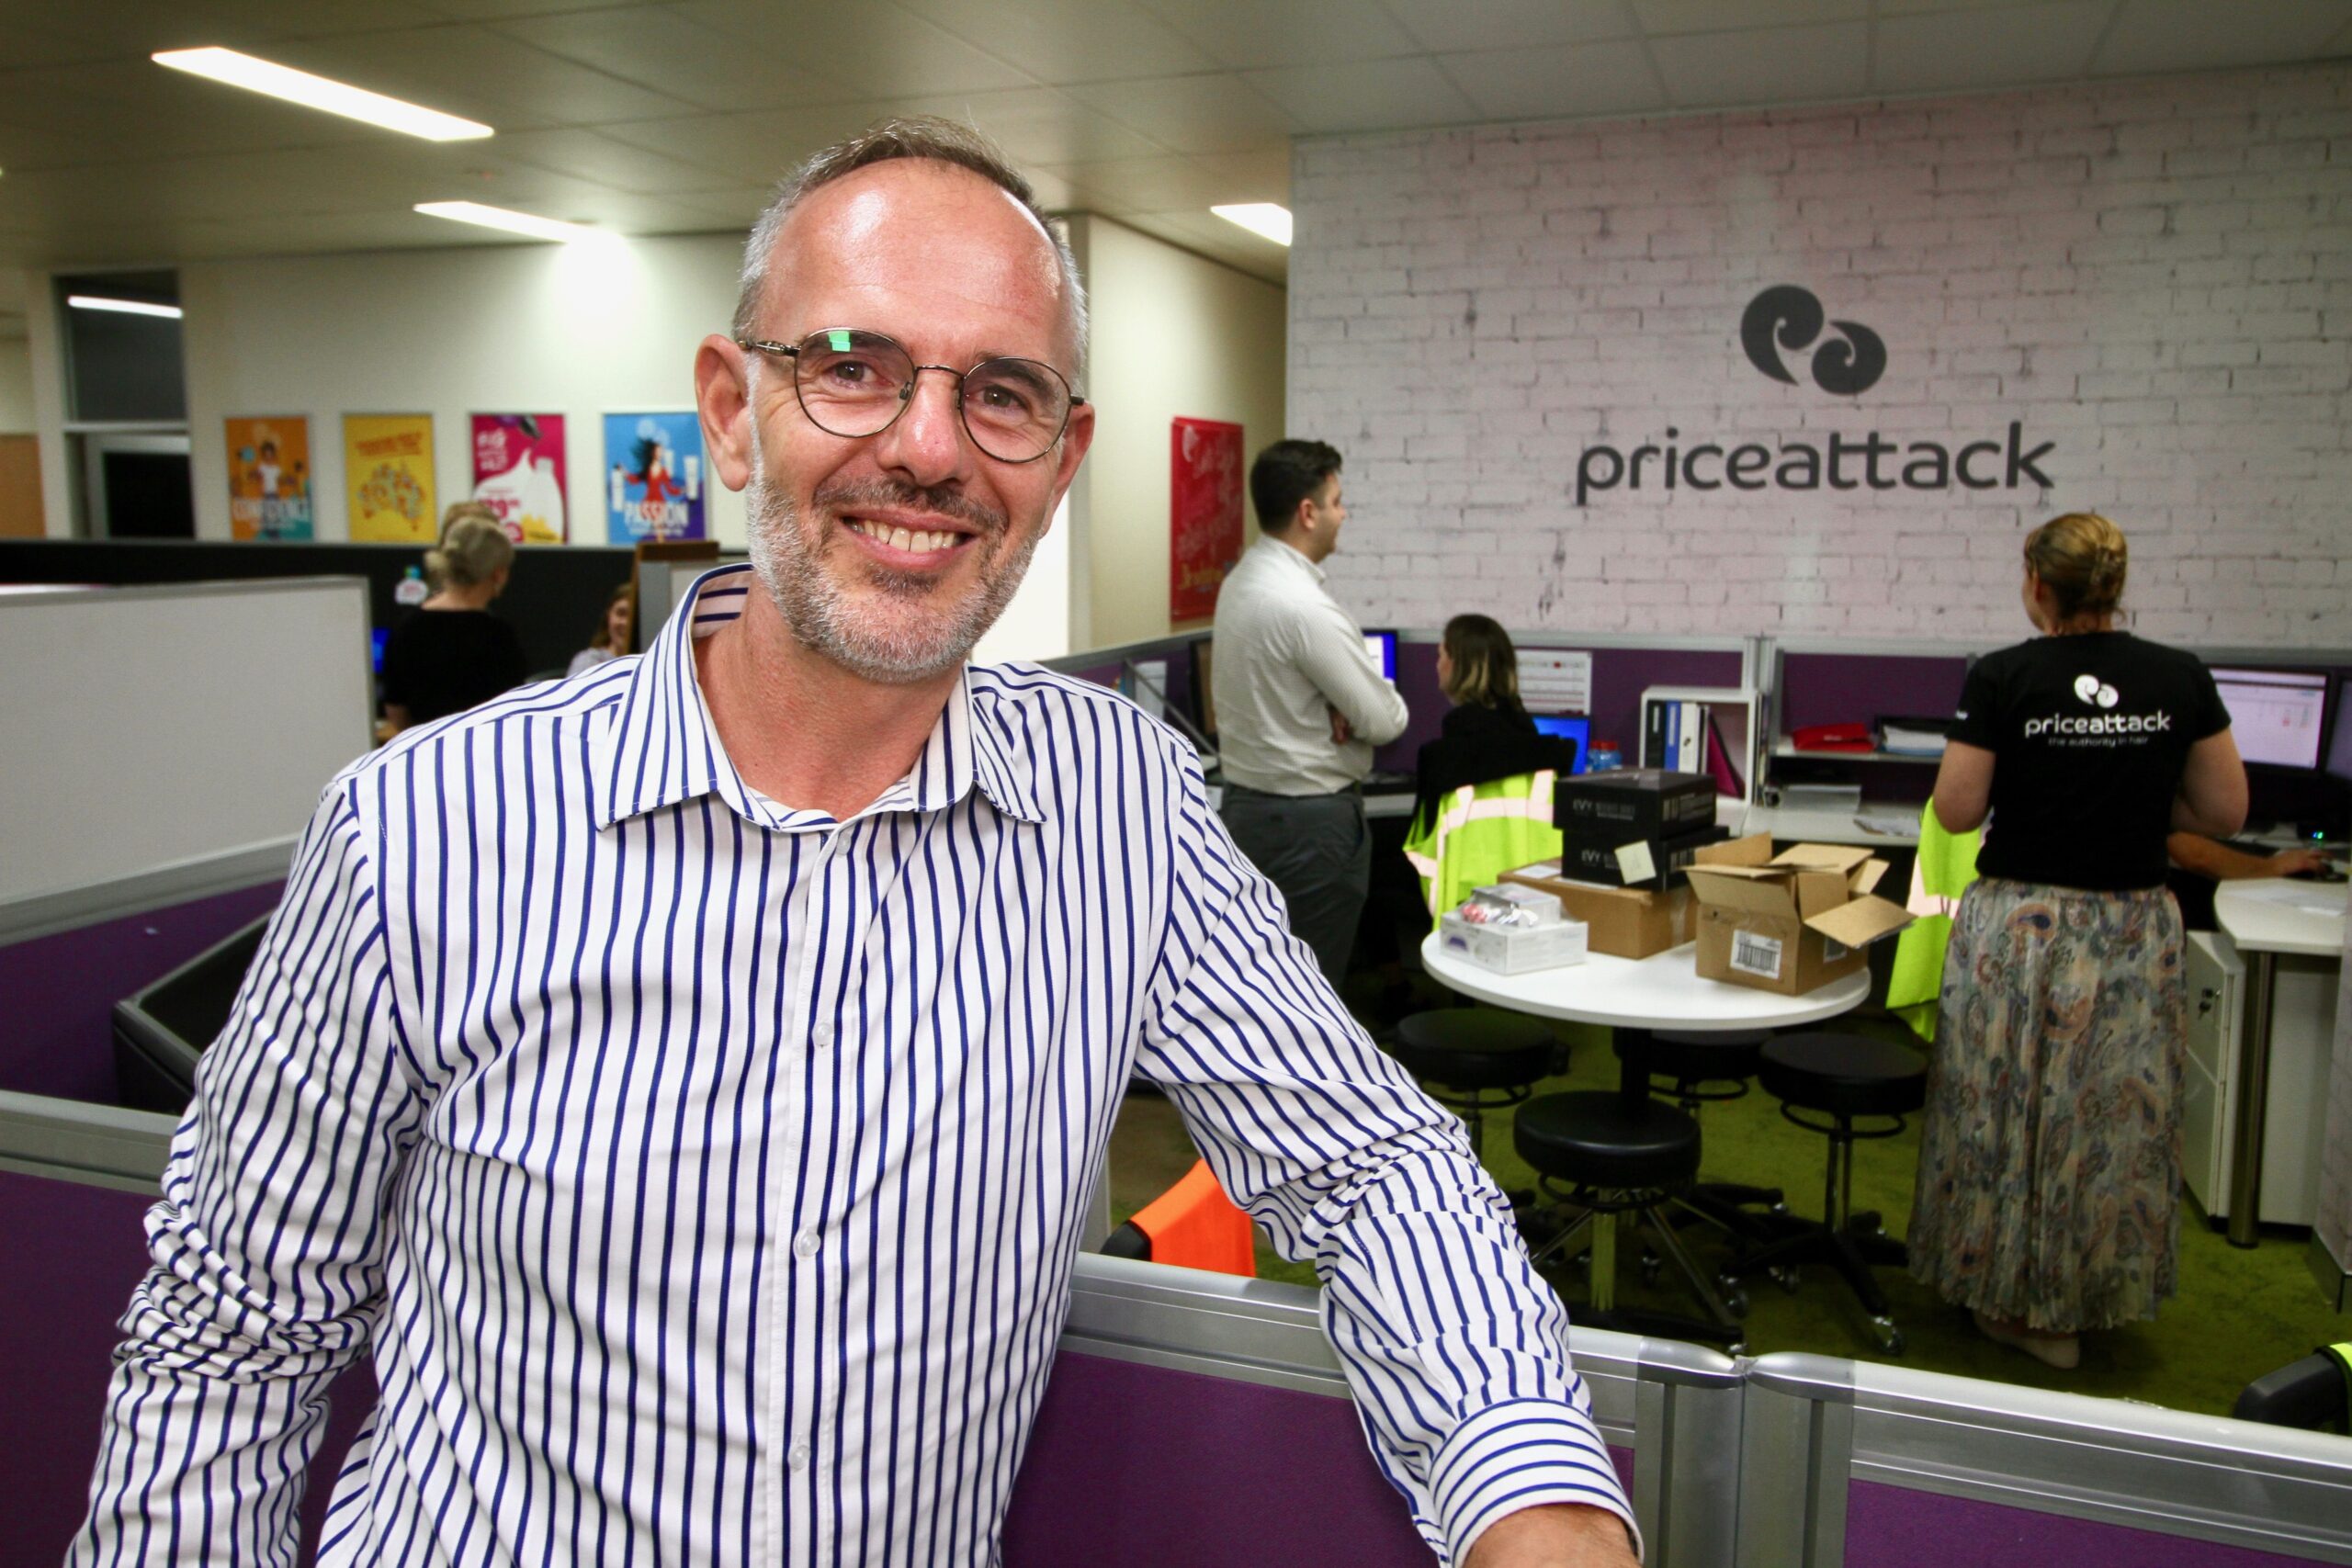 Price Attack appoints network development manager Tony Brusch